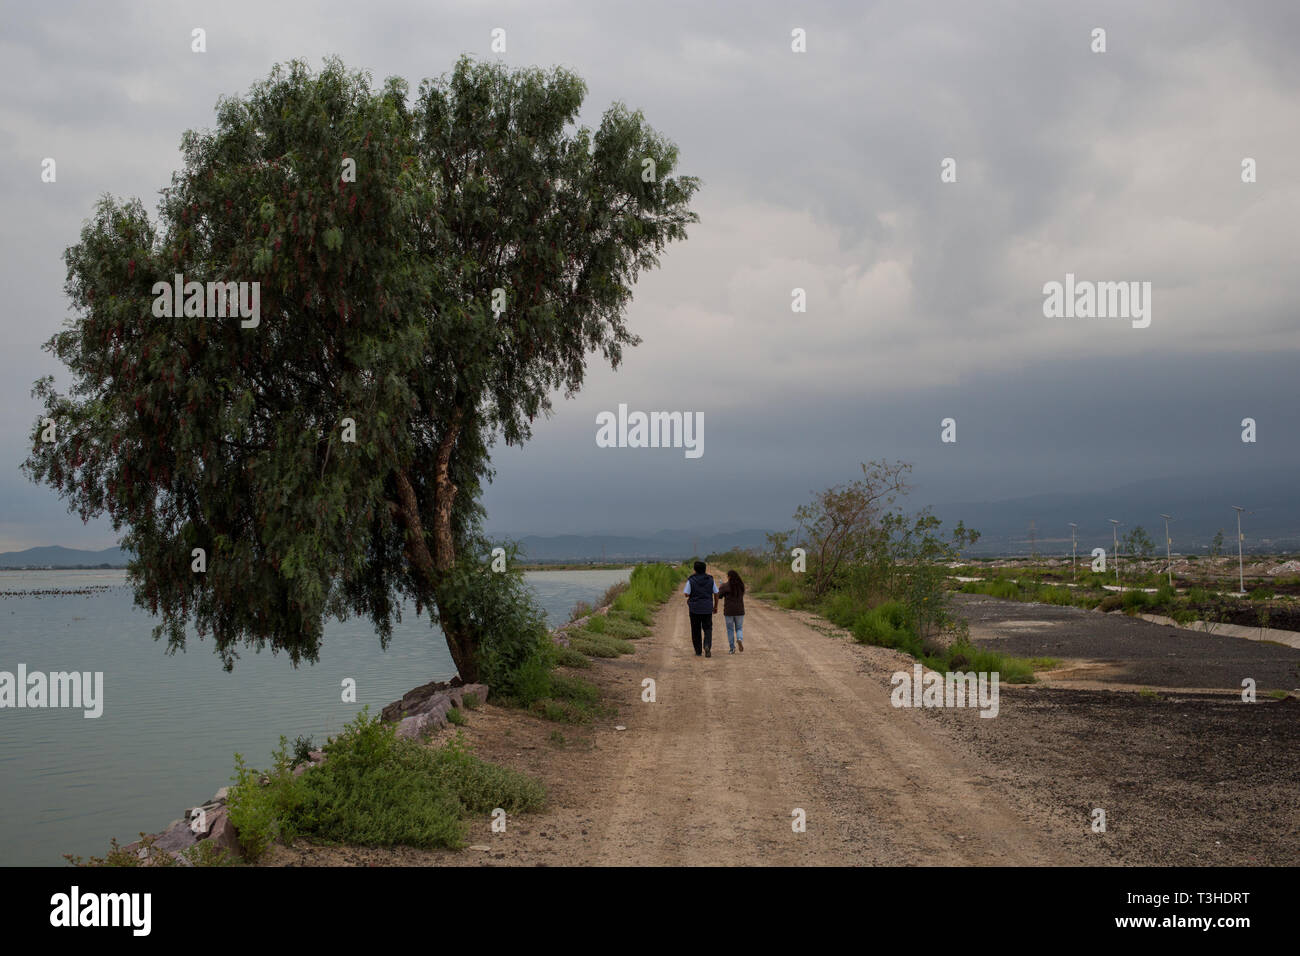 People walk beside Lake Texcoco, in the State of Mexico, Mexico, August 25, 2017. The new Mexico City International Airport is being constructed on the far side of Lake. Mexico's newly elected president Andreas Lopez Manuel Obrador cancelled this project in the fall of 2018, while it was in the middle of construction. The airport was set to replace the aging Benito Juarez International Airport. Stock Photo